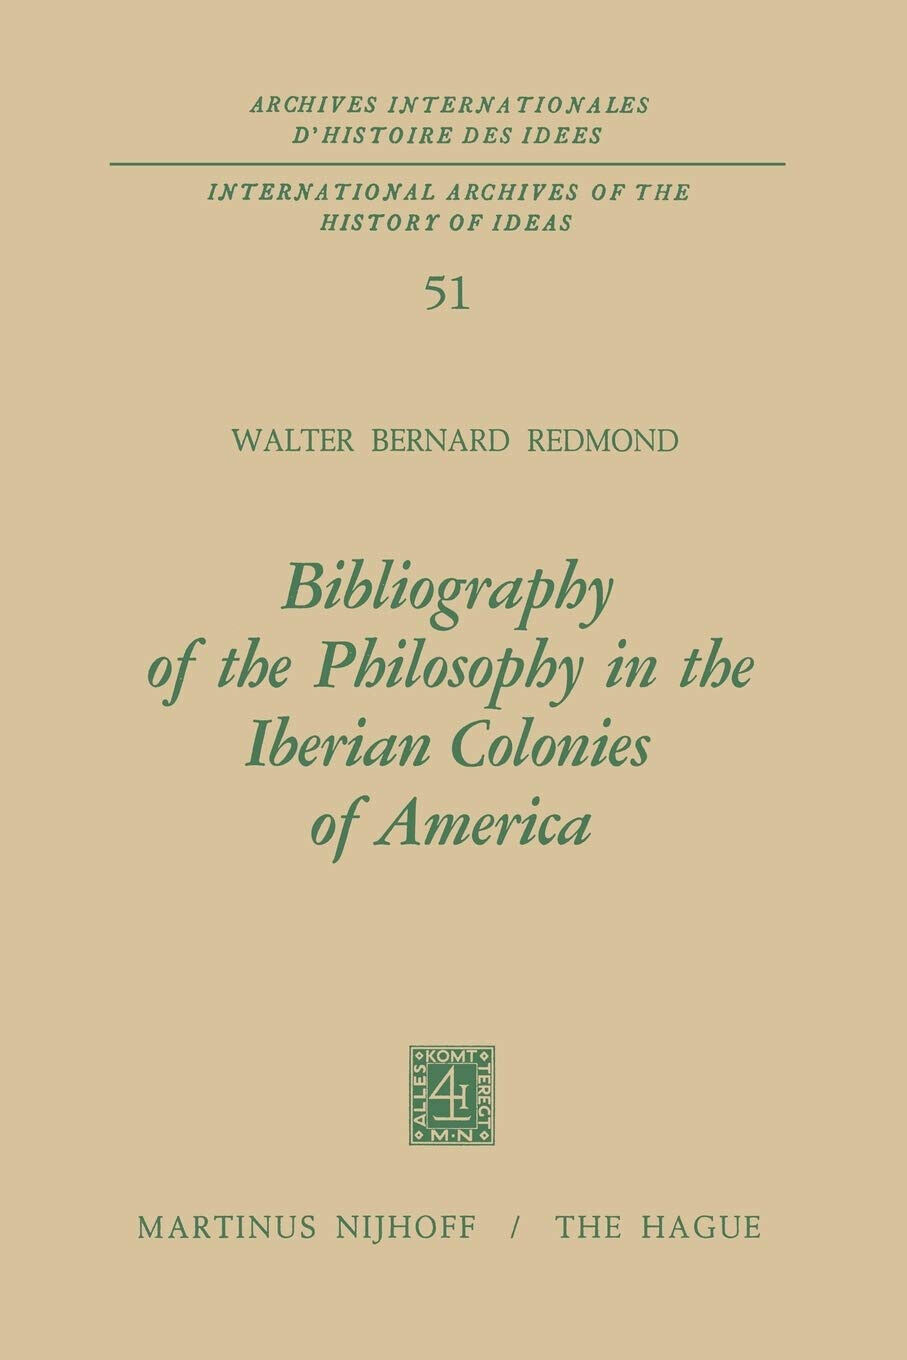 Bibliography of the Philosophy in the Iberian Colonies of America - Springer libro usato